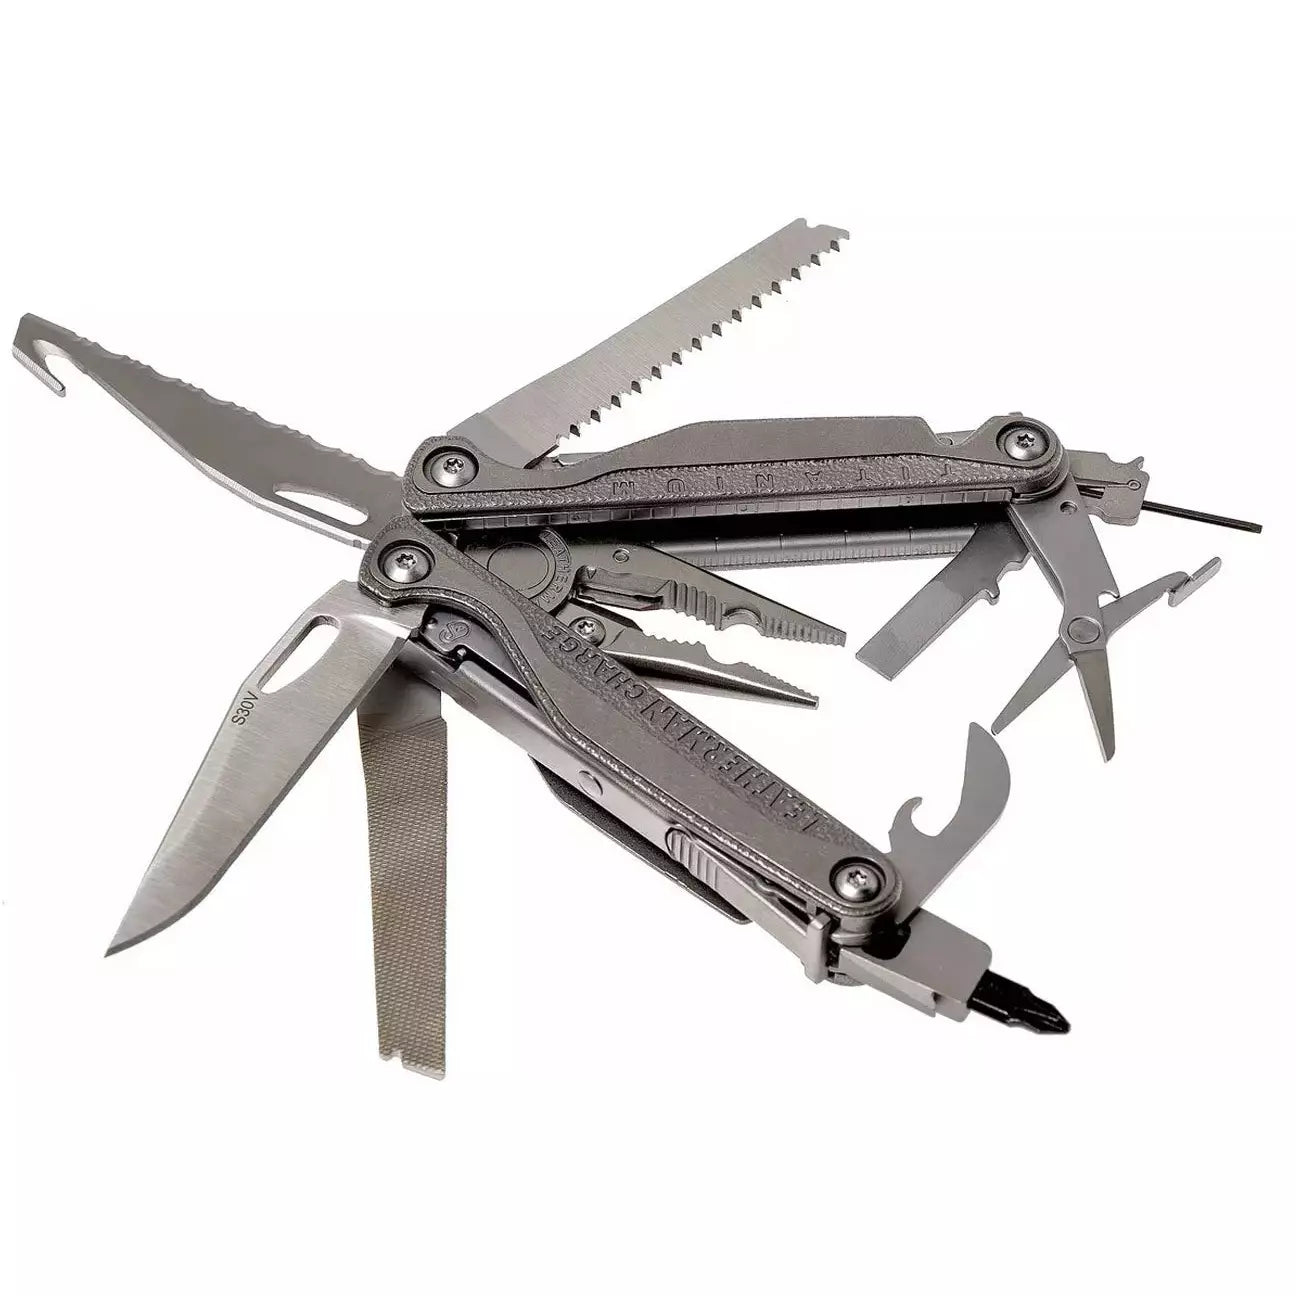 OUTIL LEATHERMAN CHARGE + TTI